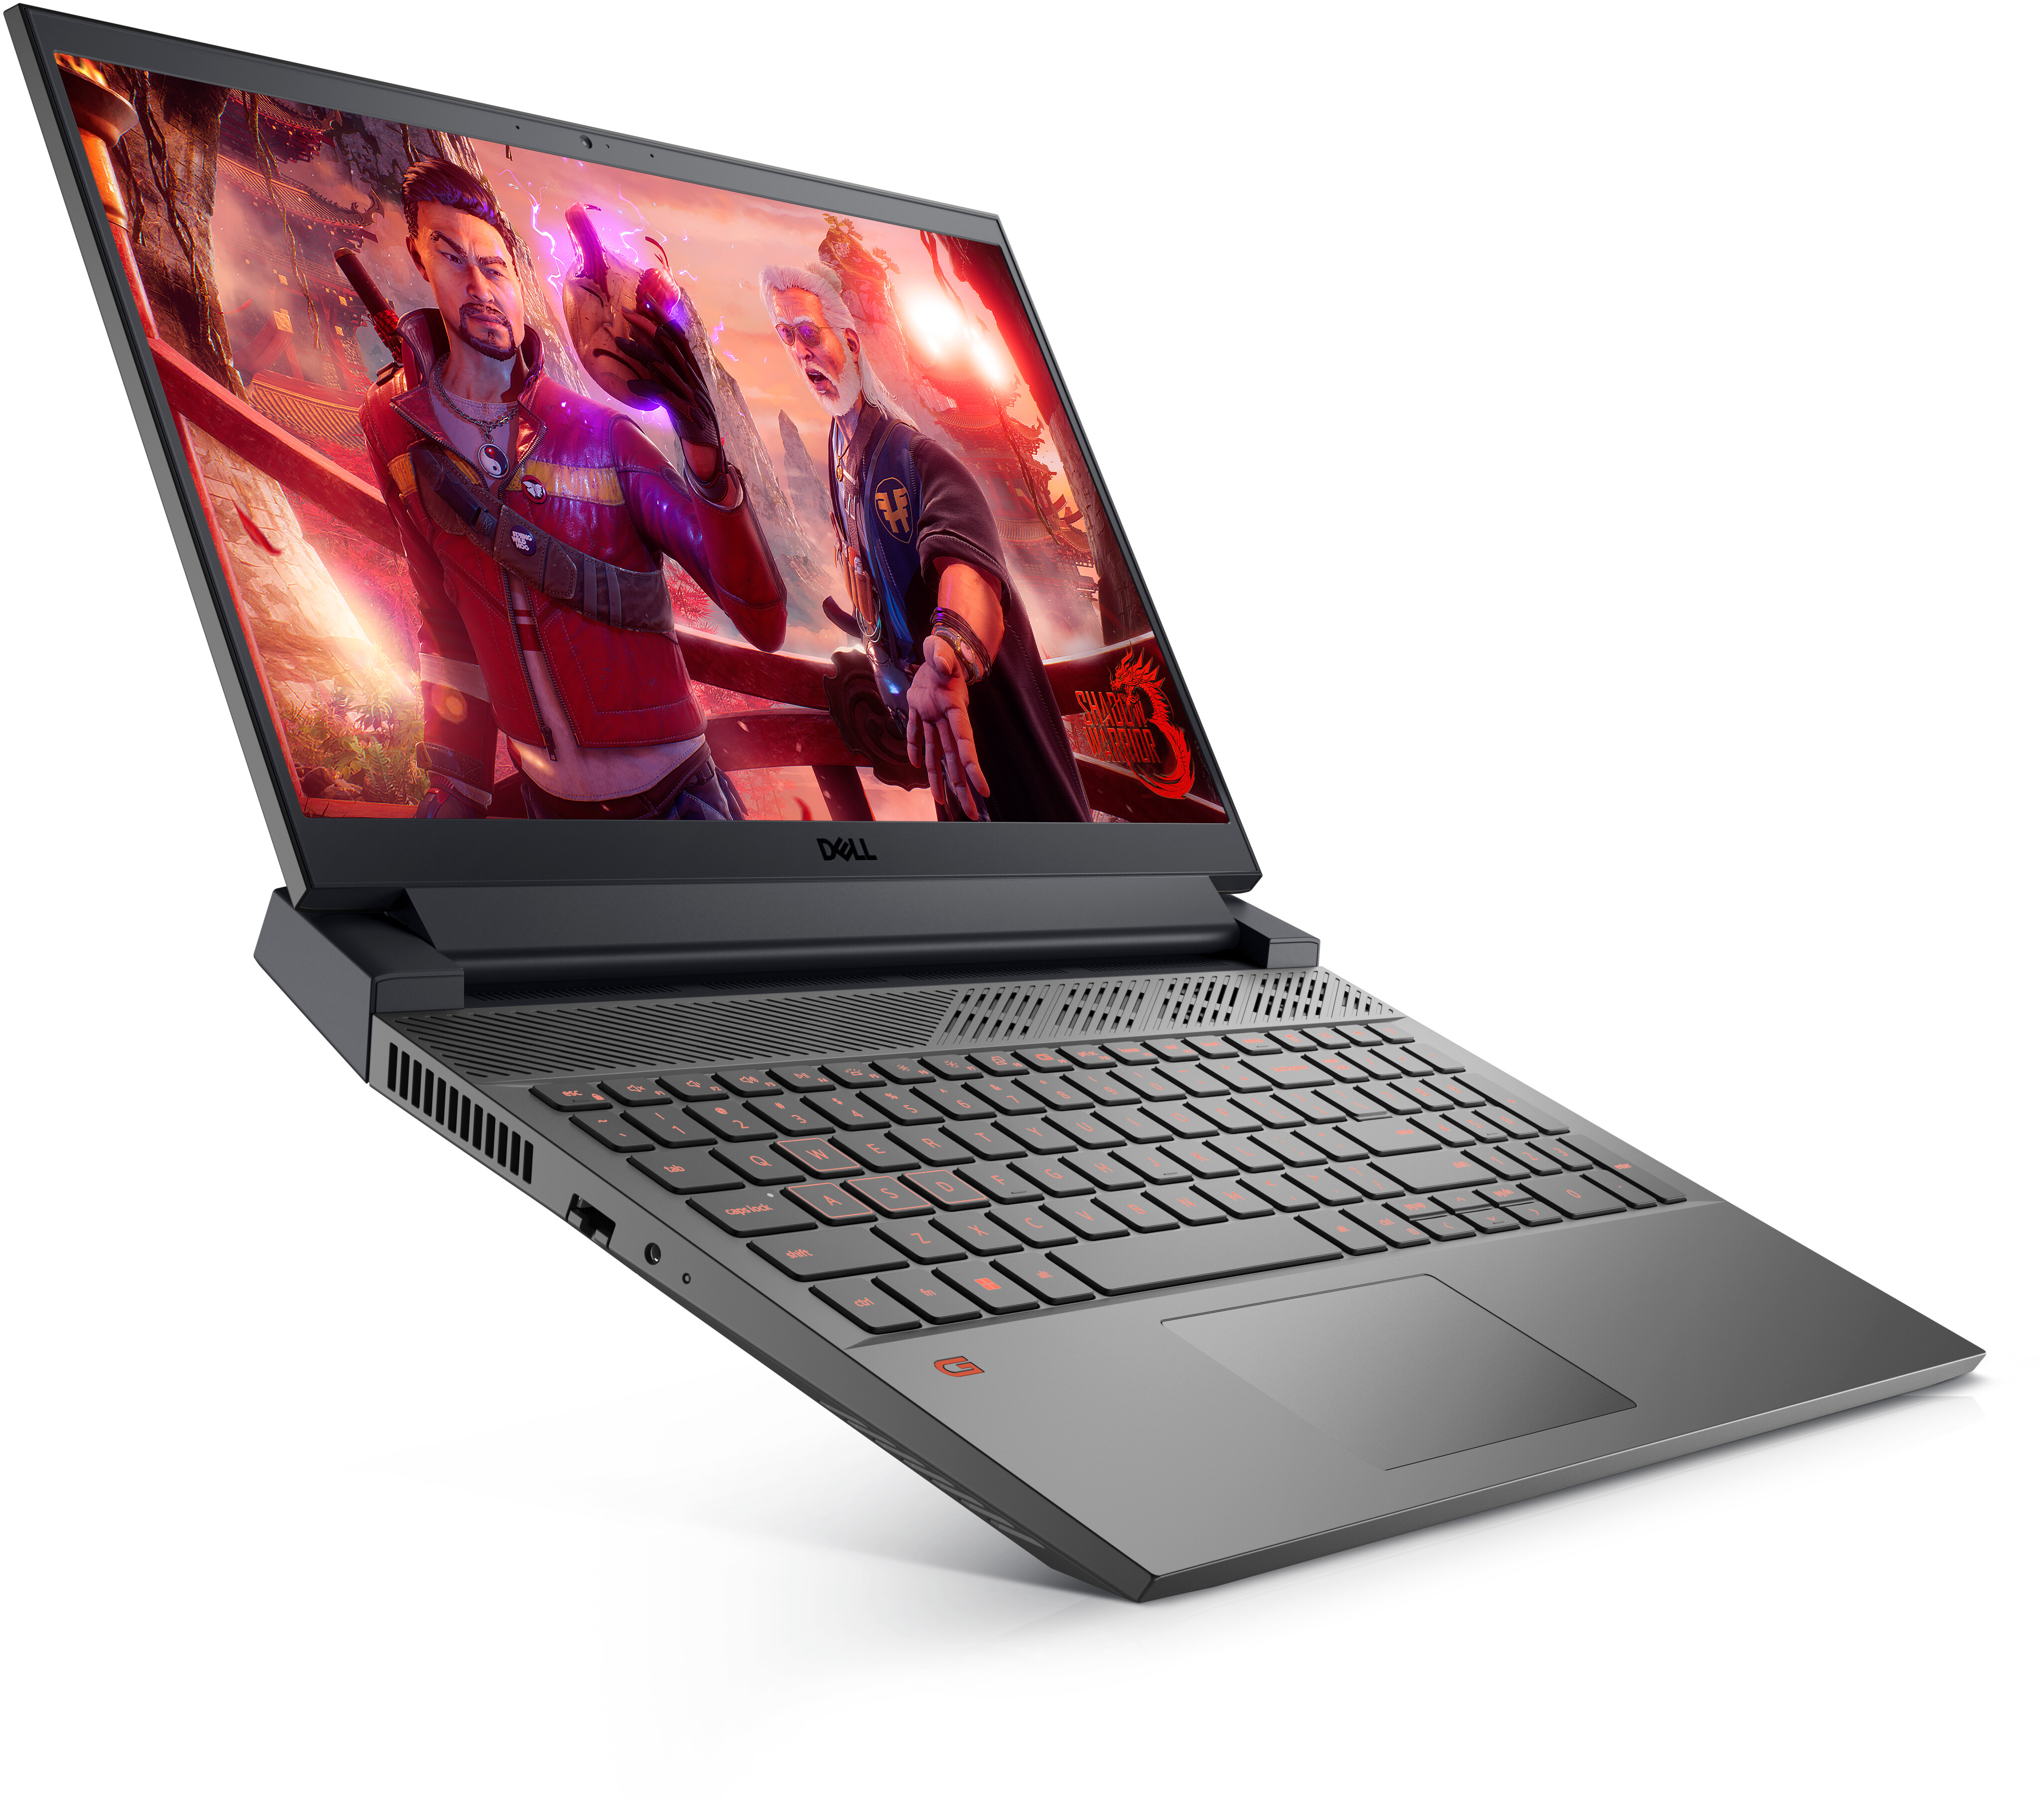 https://i.dell.com/is/image/DellContent/content/dam/ss2/product-images/dell-client-products/notebooks/g-series/g15-5525/media-gallery/g15-5525-bk-coralkb/notebook-g-15-5525-black-coralkb-gallery-9.psd?fmt=pjpg&pscan=auto&scl=1&wid=4104&hei=3622&qlt=100,1&resMode=sharp2&size=4104,3622&chrss=full&imwidth=5000